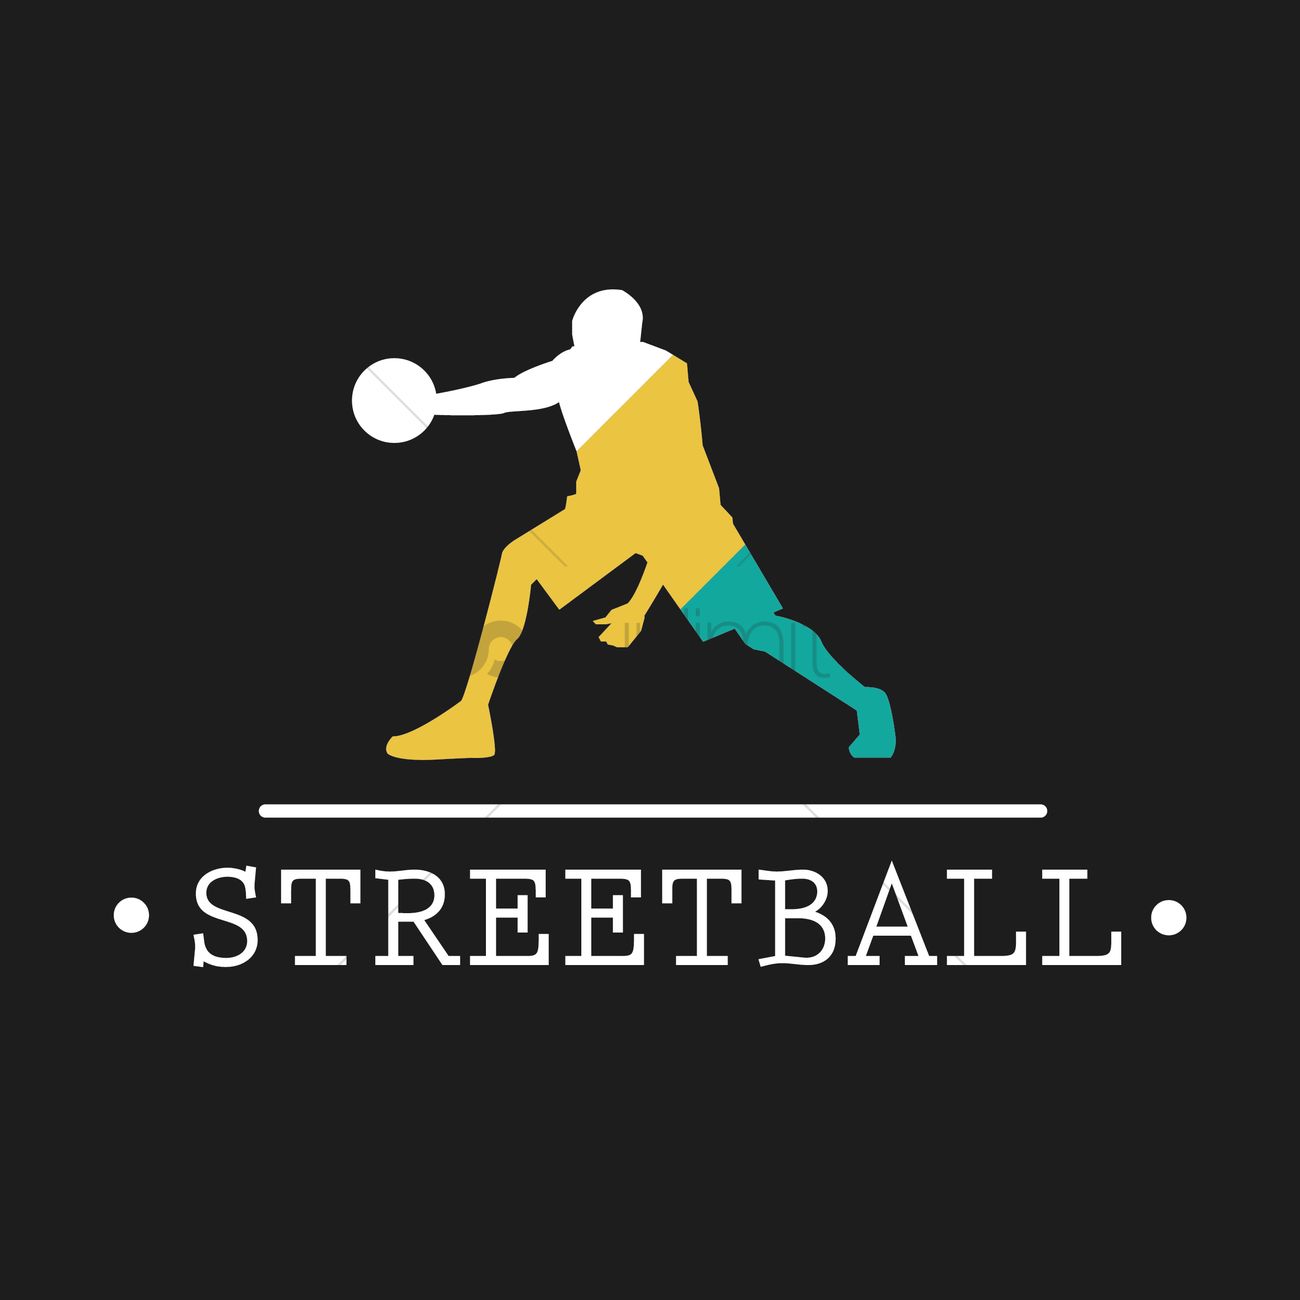 Streetball Wallpaper Vector Image Stockunlimited